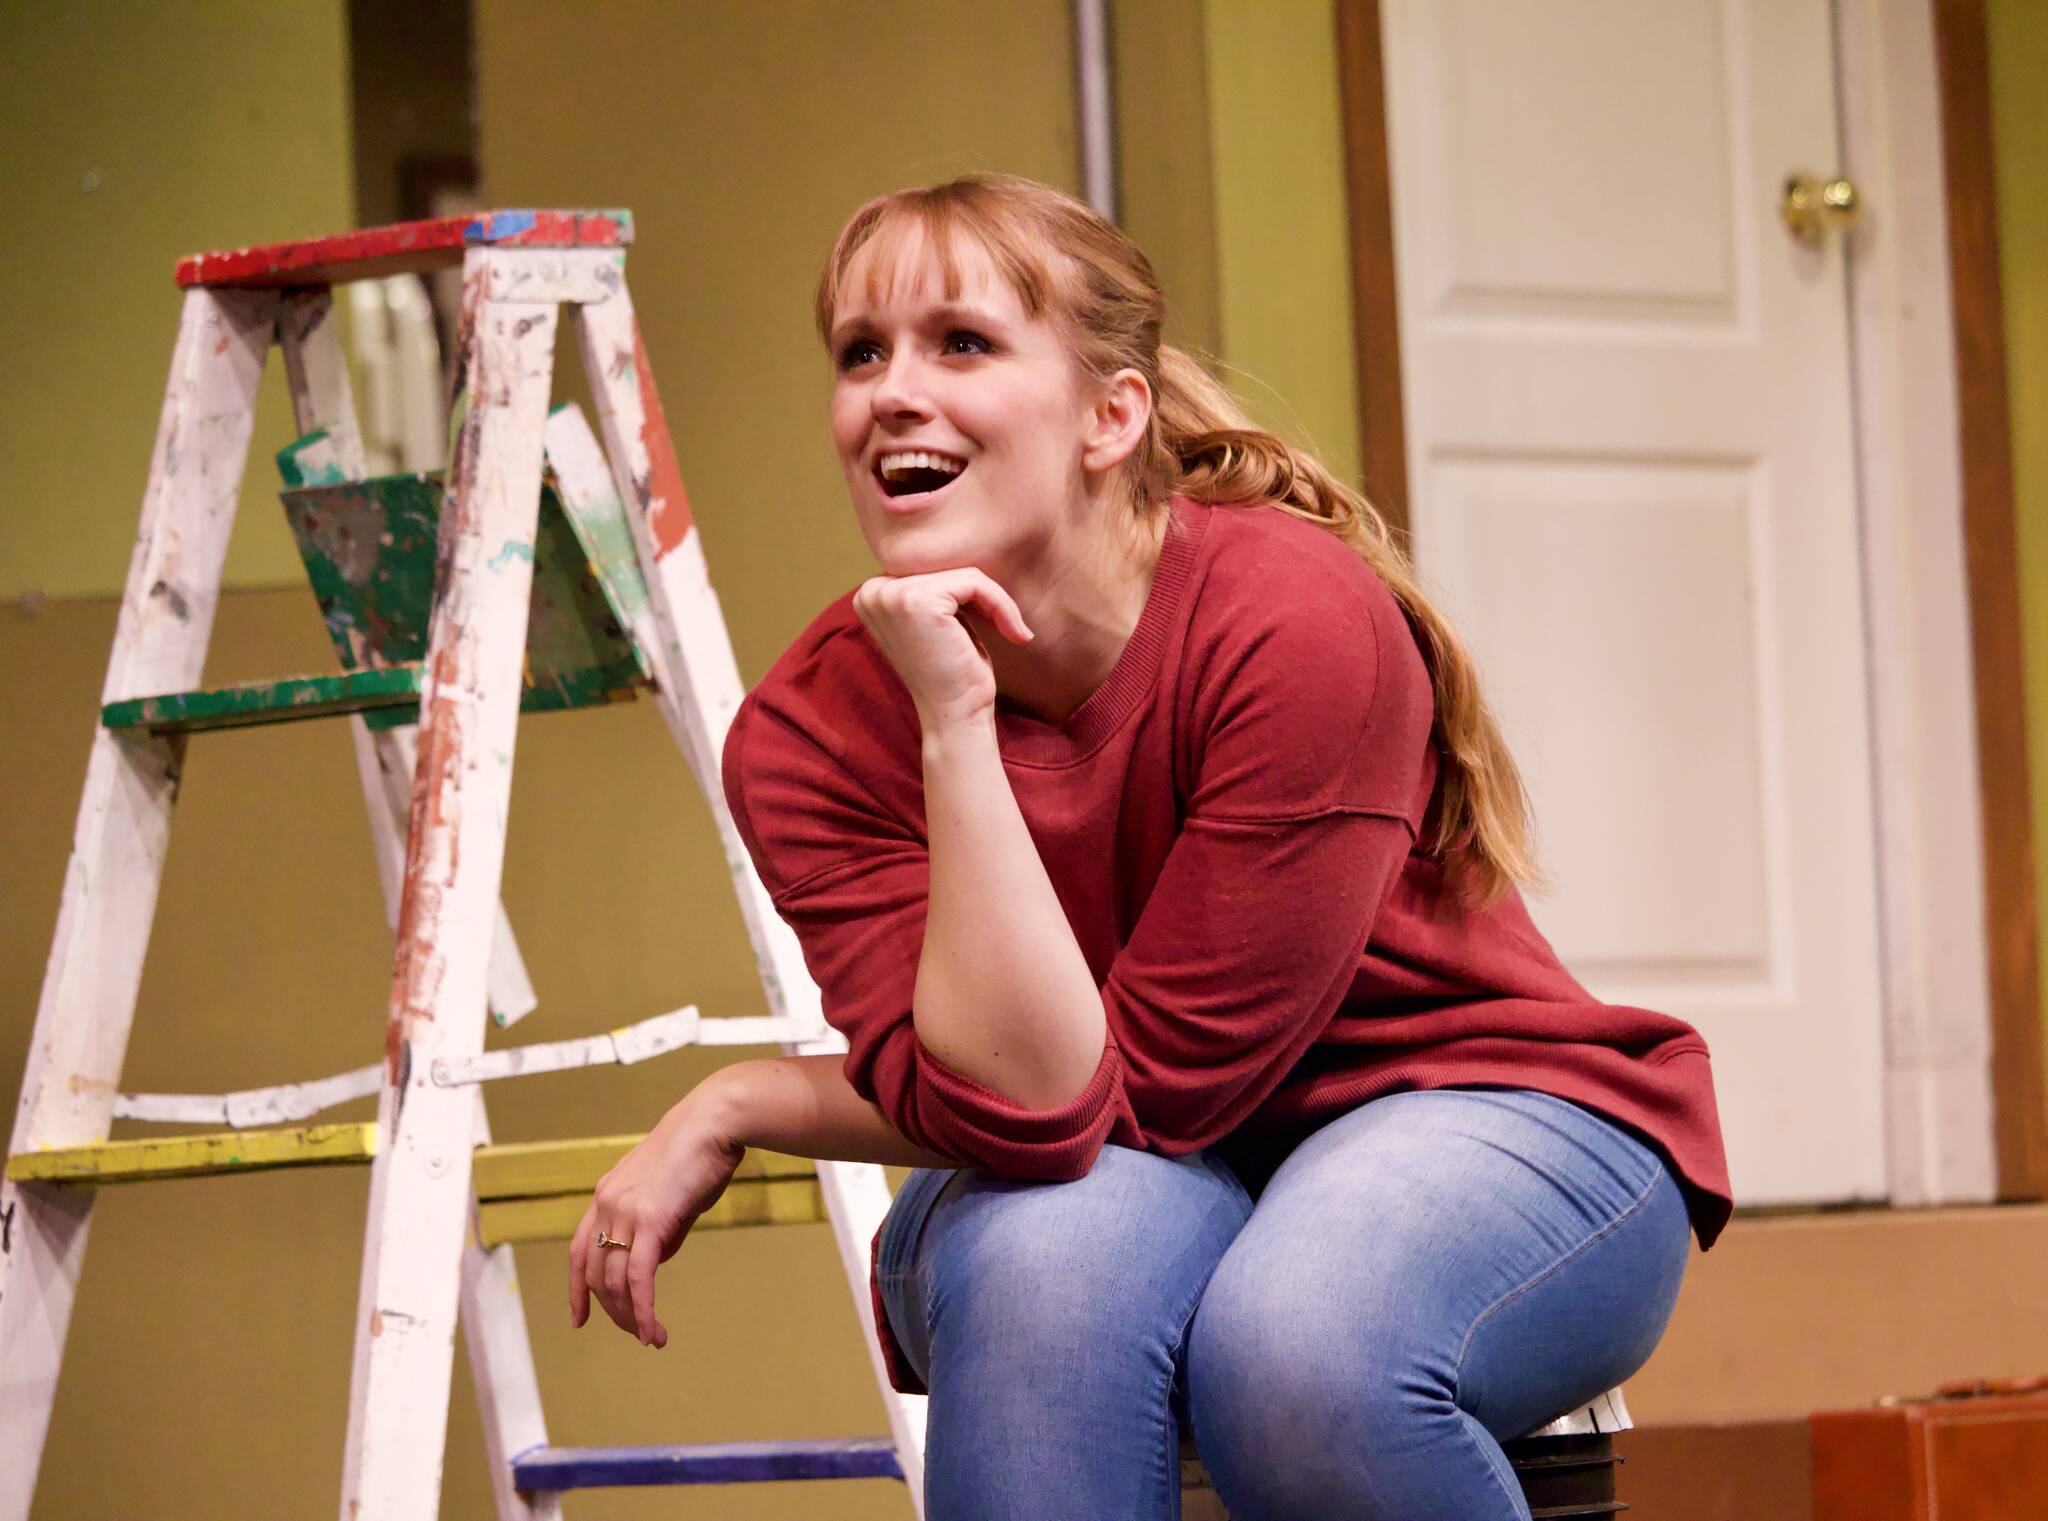 Photo by Rachel Rosen/Whidbey News-Times
The Whidbey News-Times’ own Karina Andrew stars as Corie, the free-spirited female lead of “Barefoot in the Park.”